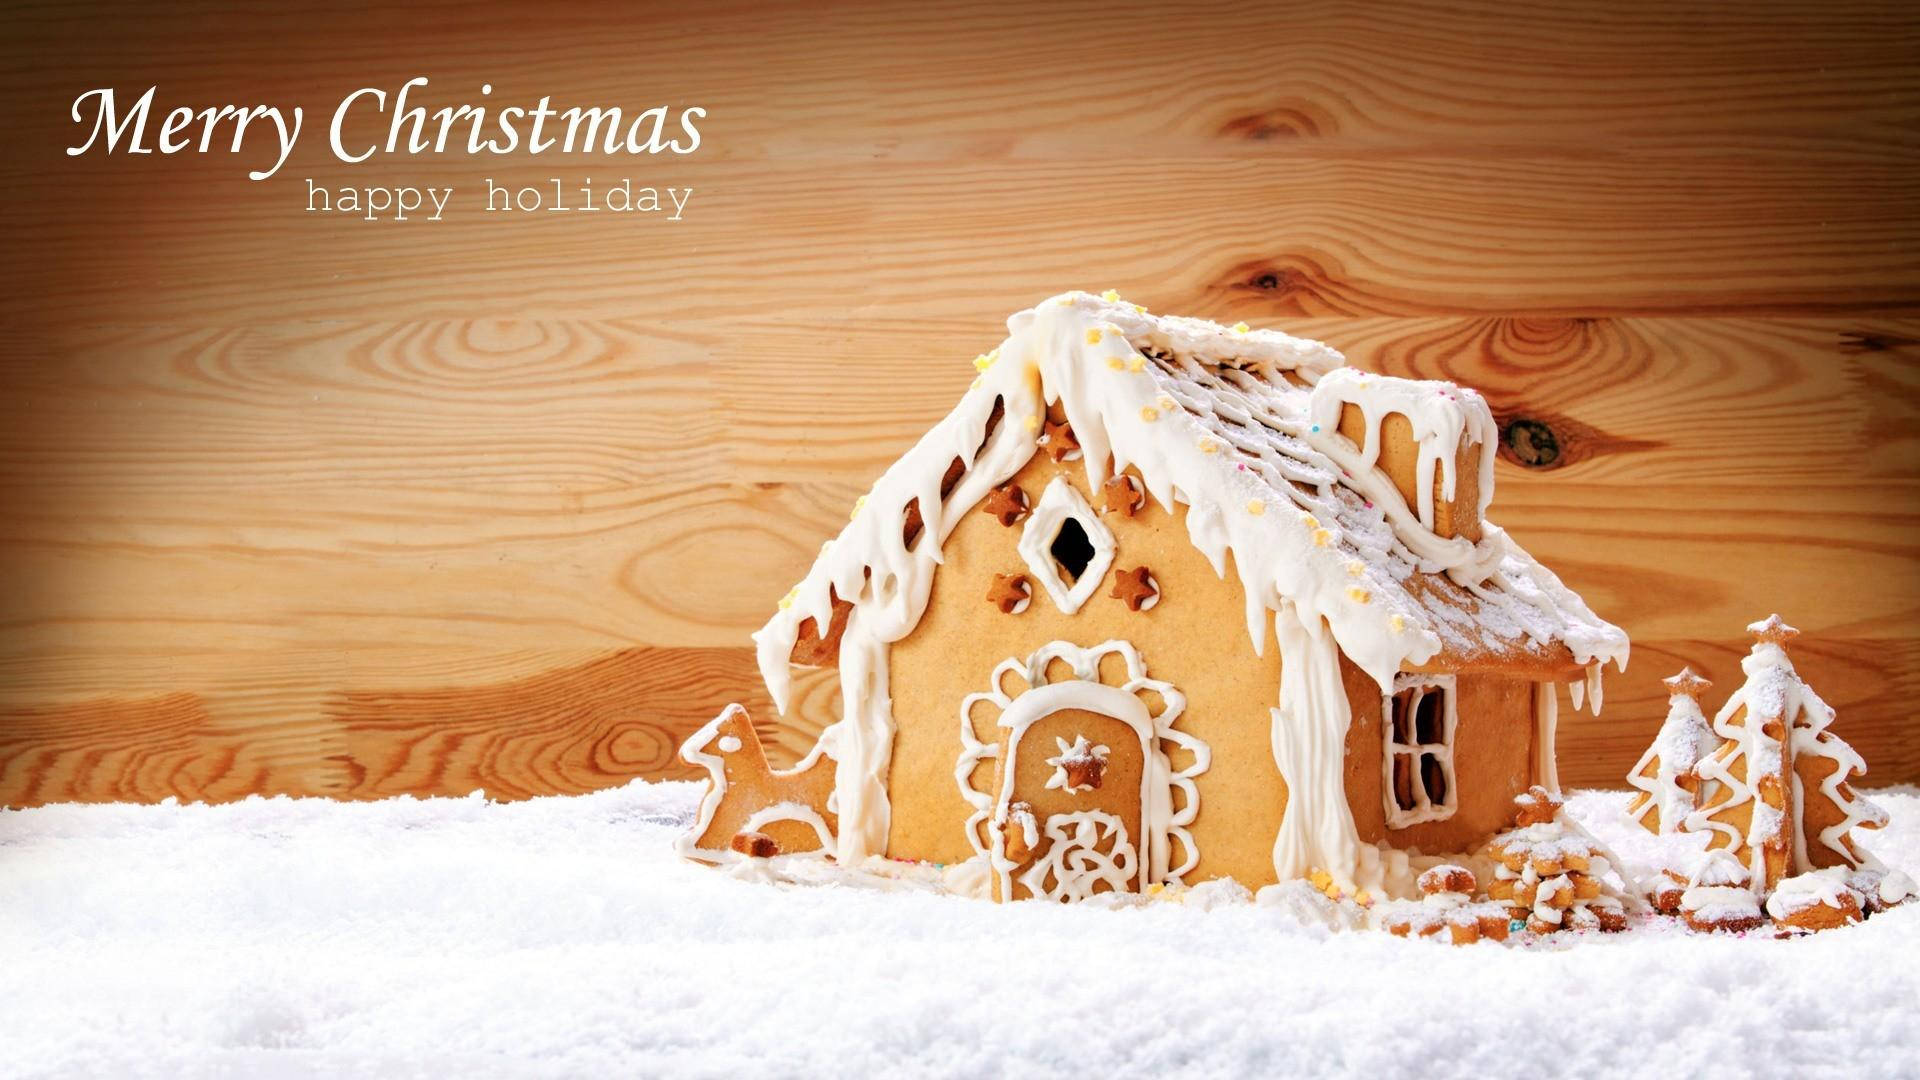 Happy Holidays Gingerbread House Poster